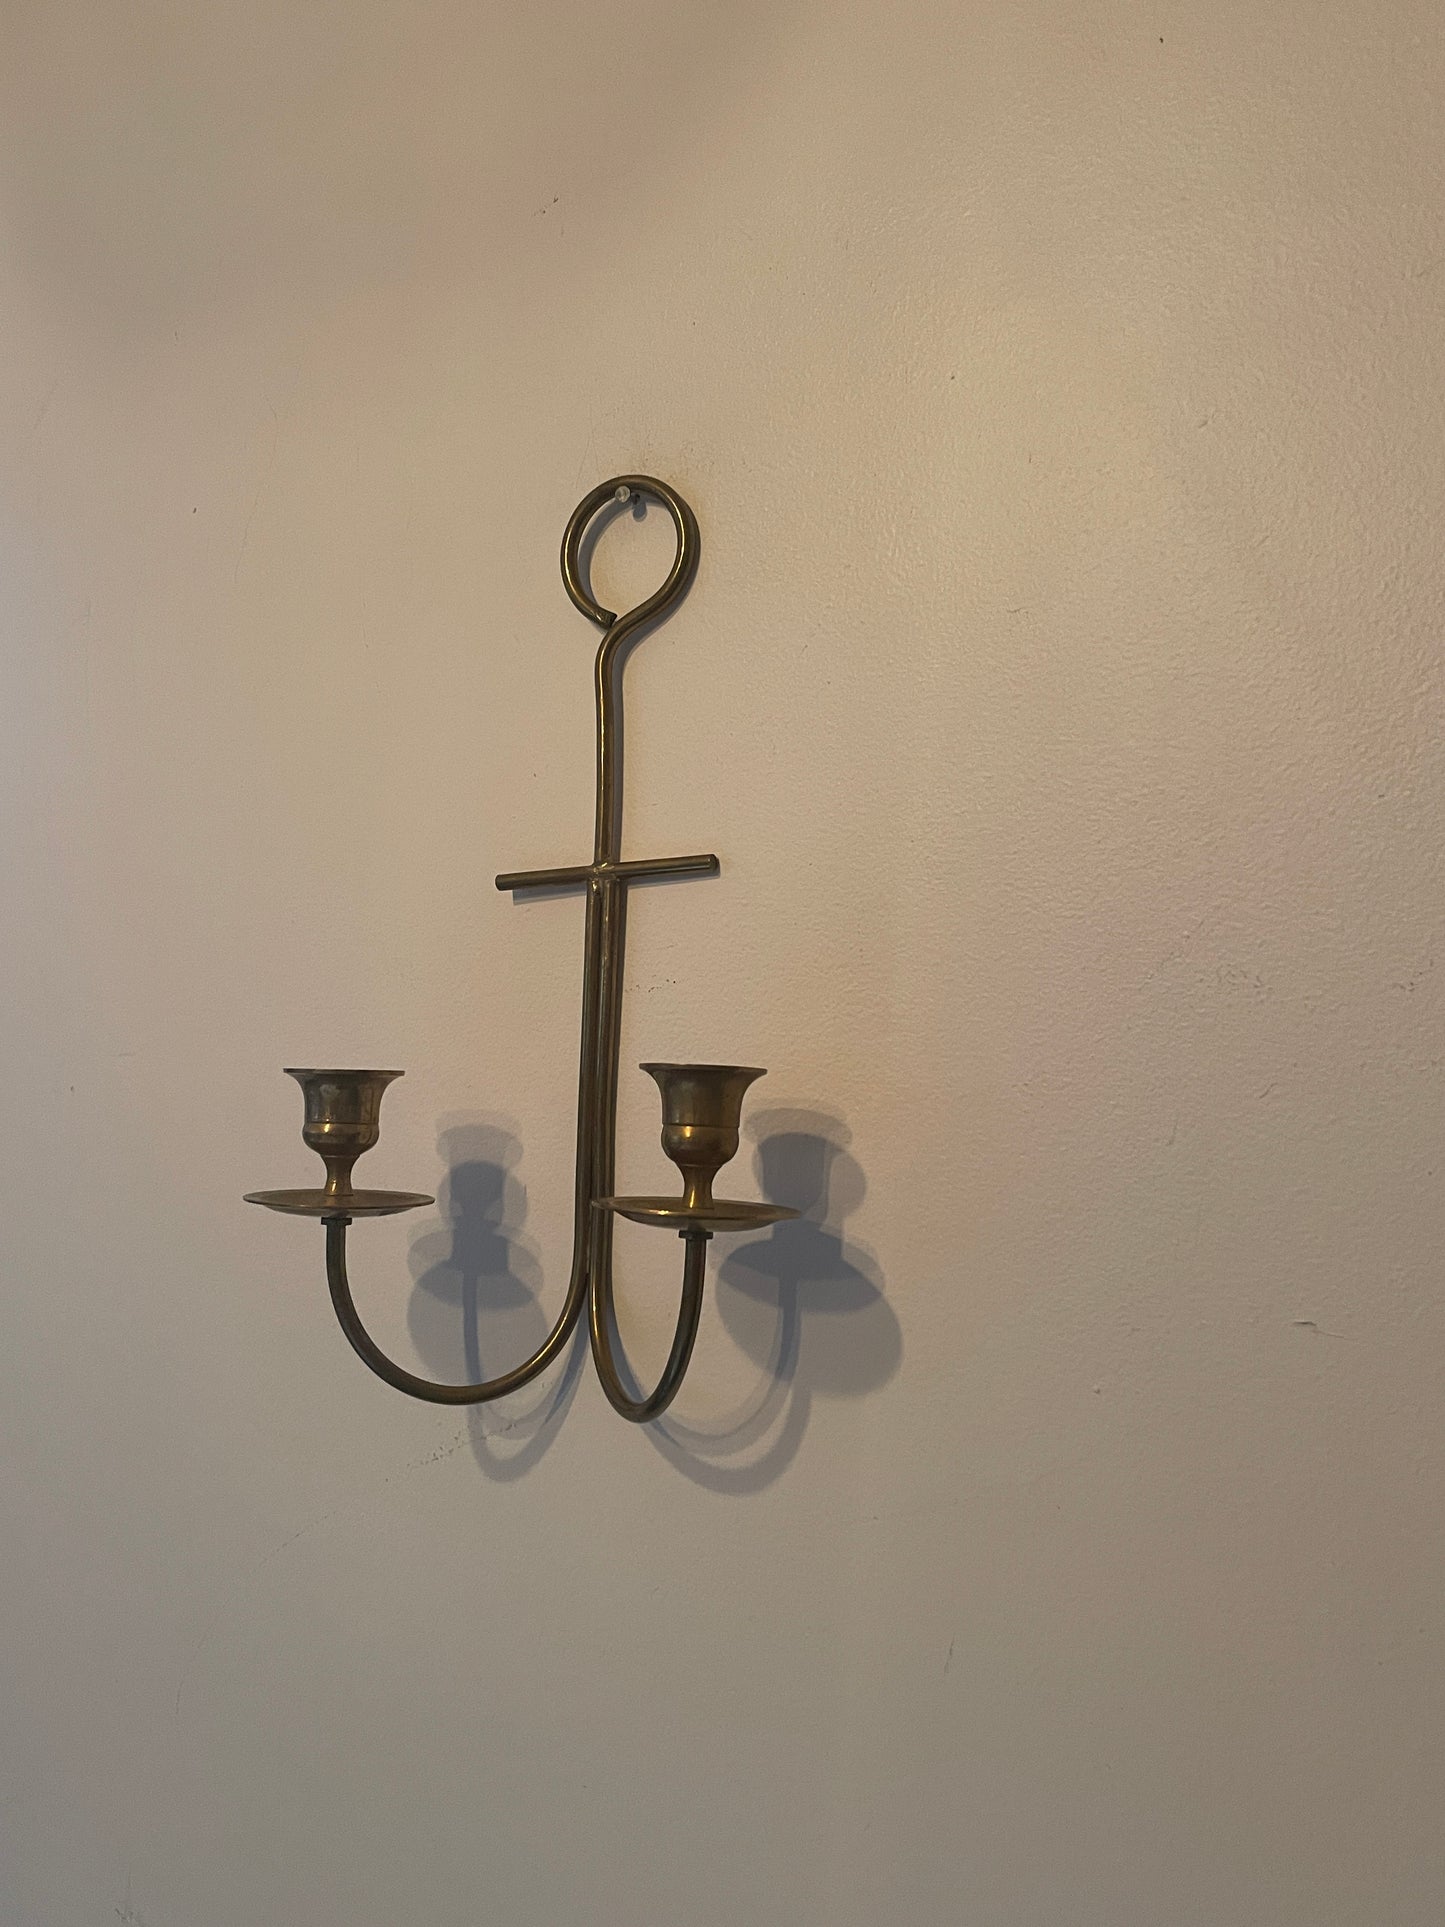 Vintage Brass Wall Mounted Candelabras - Sold as a pair